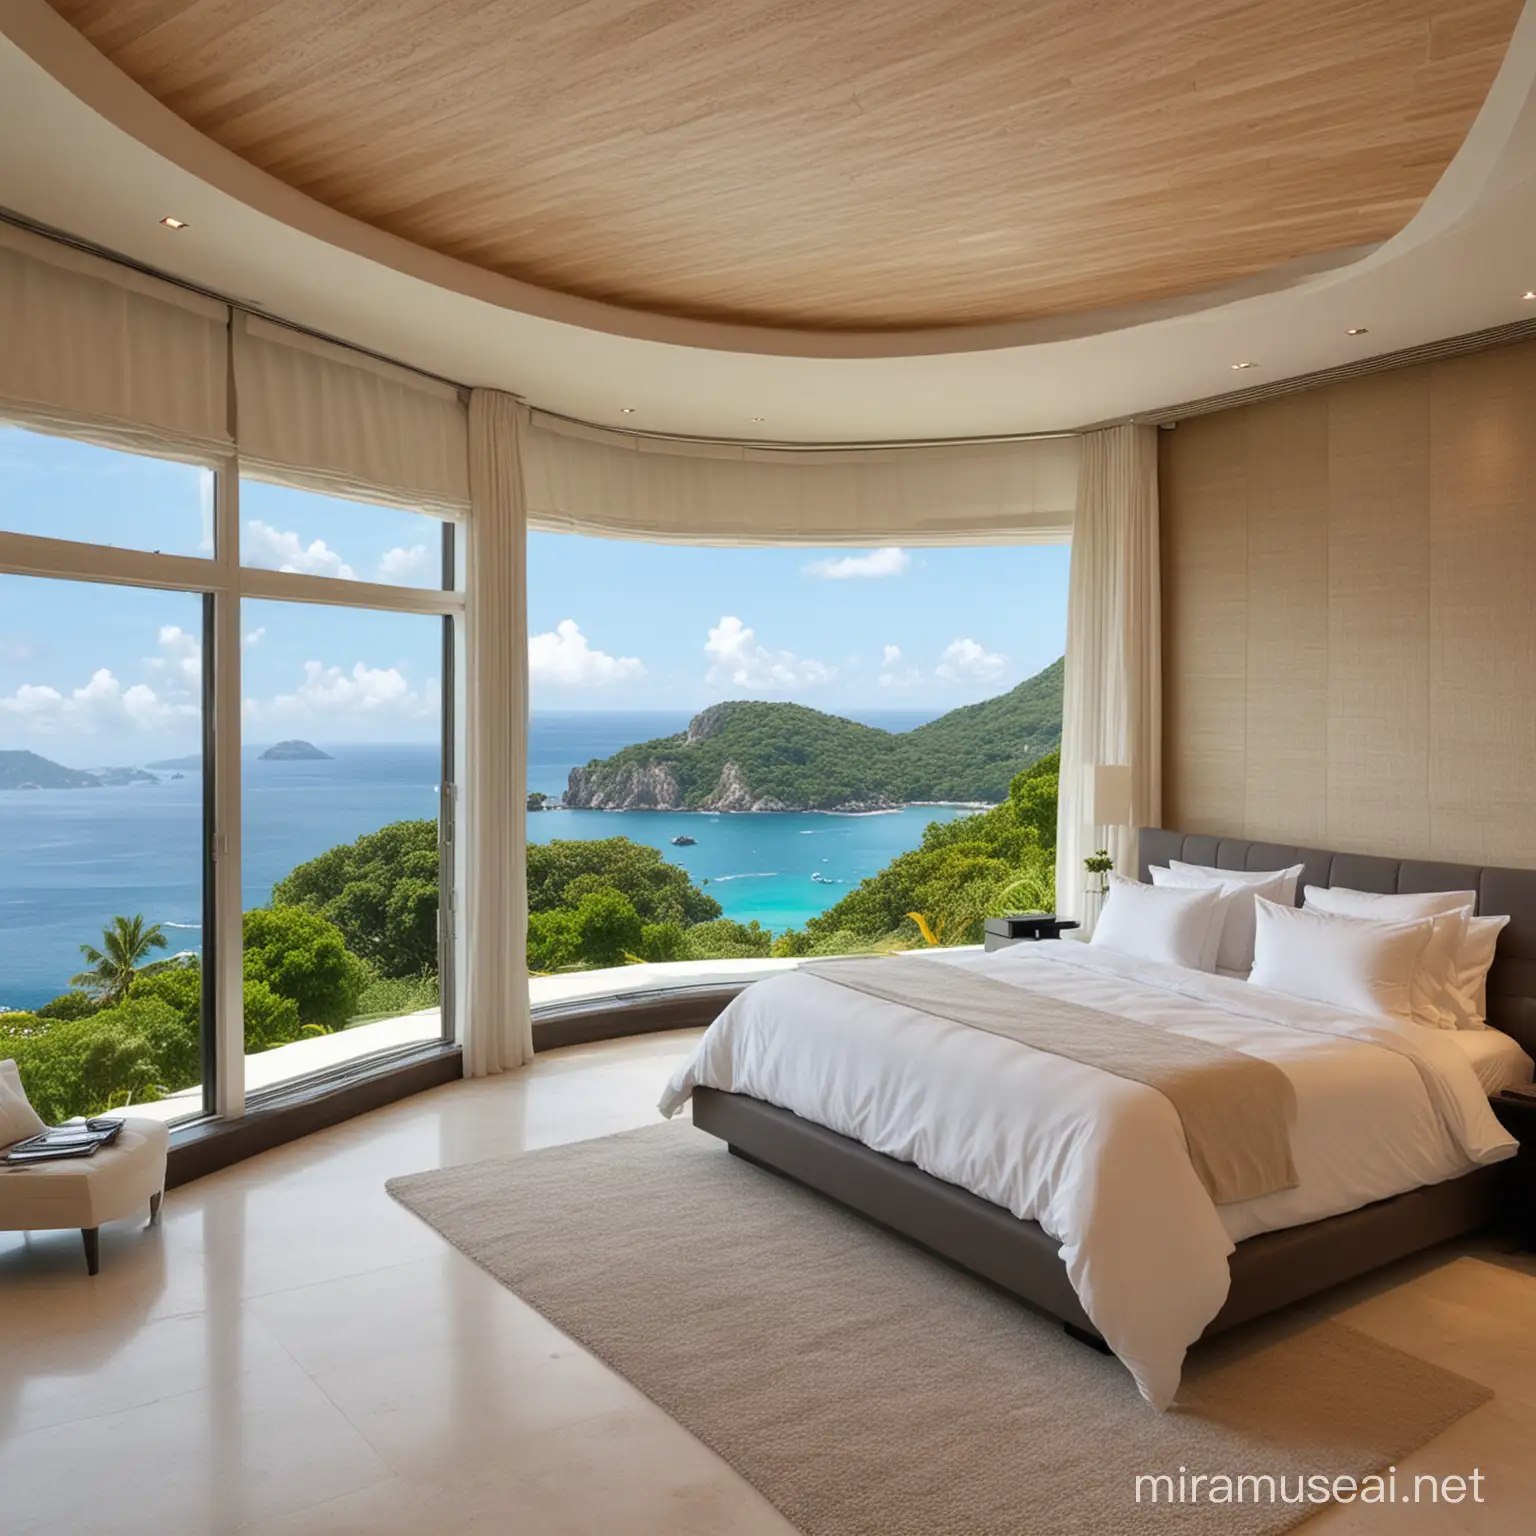 Luxurious Bedroom with Stunning Island View